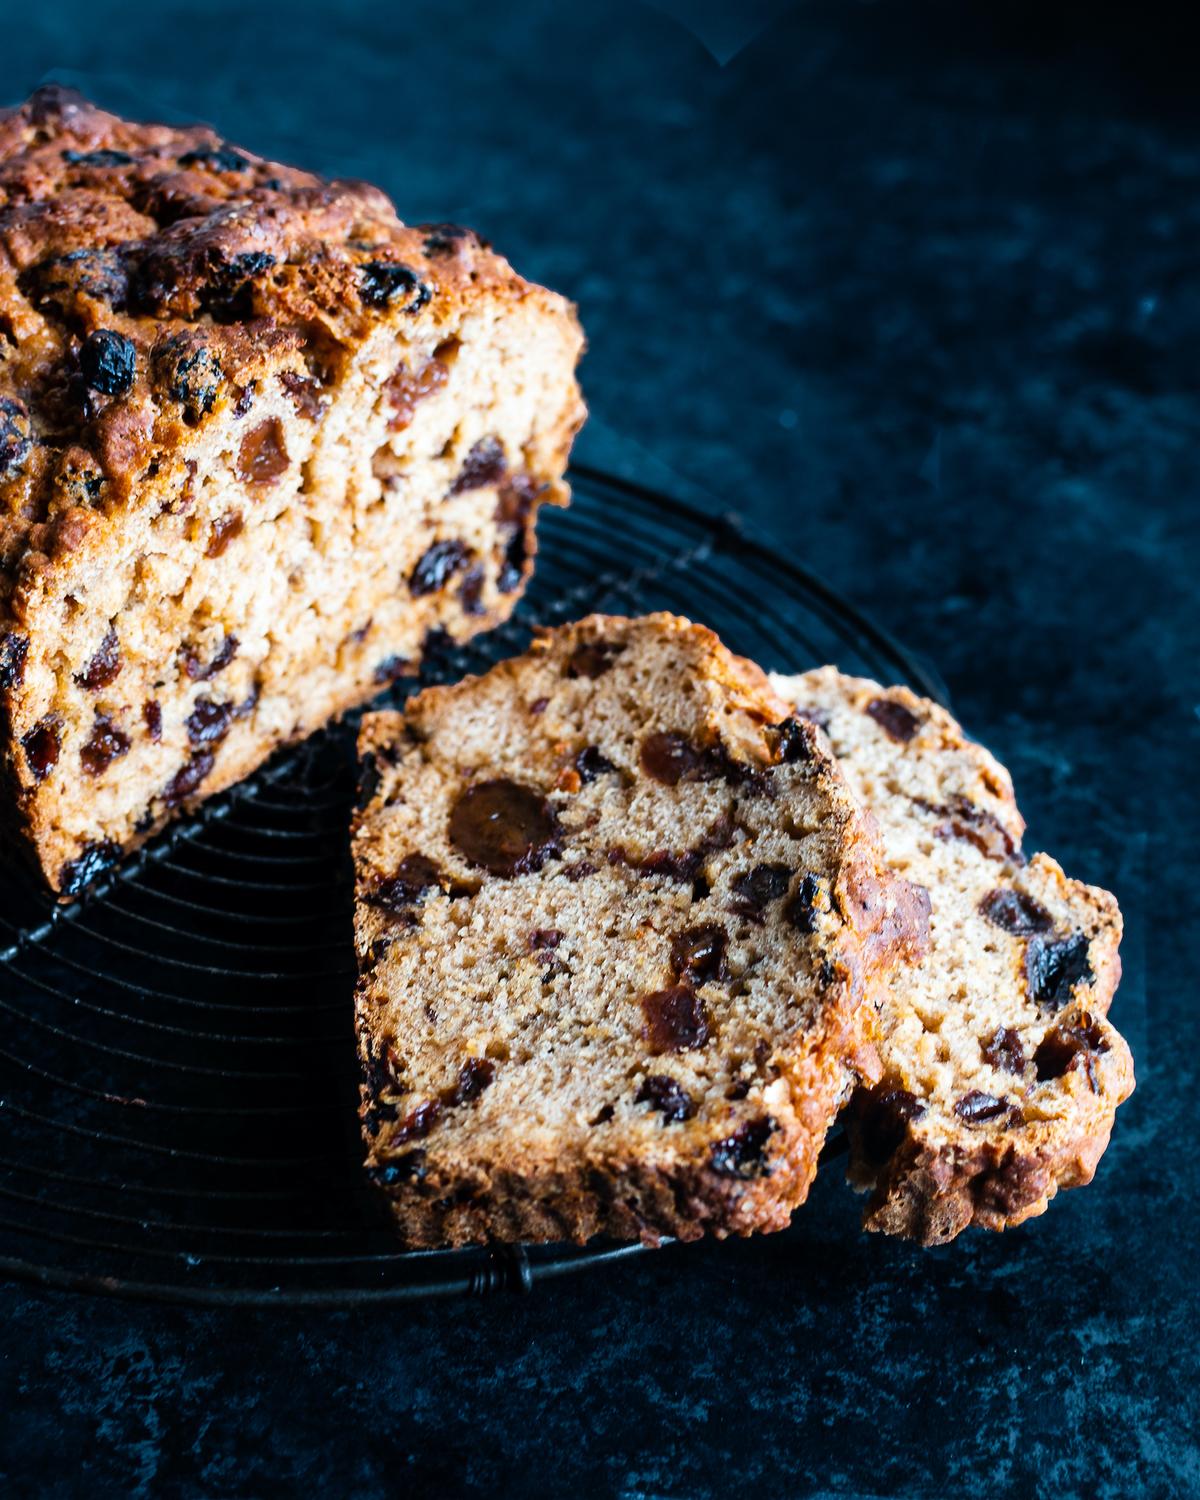 Barmbrack is a sweet, spiced bread stuffed with dried fruit—and fortune-telling trinkets. (Jennifer McGruther)